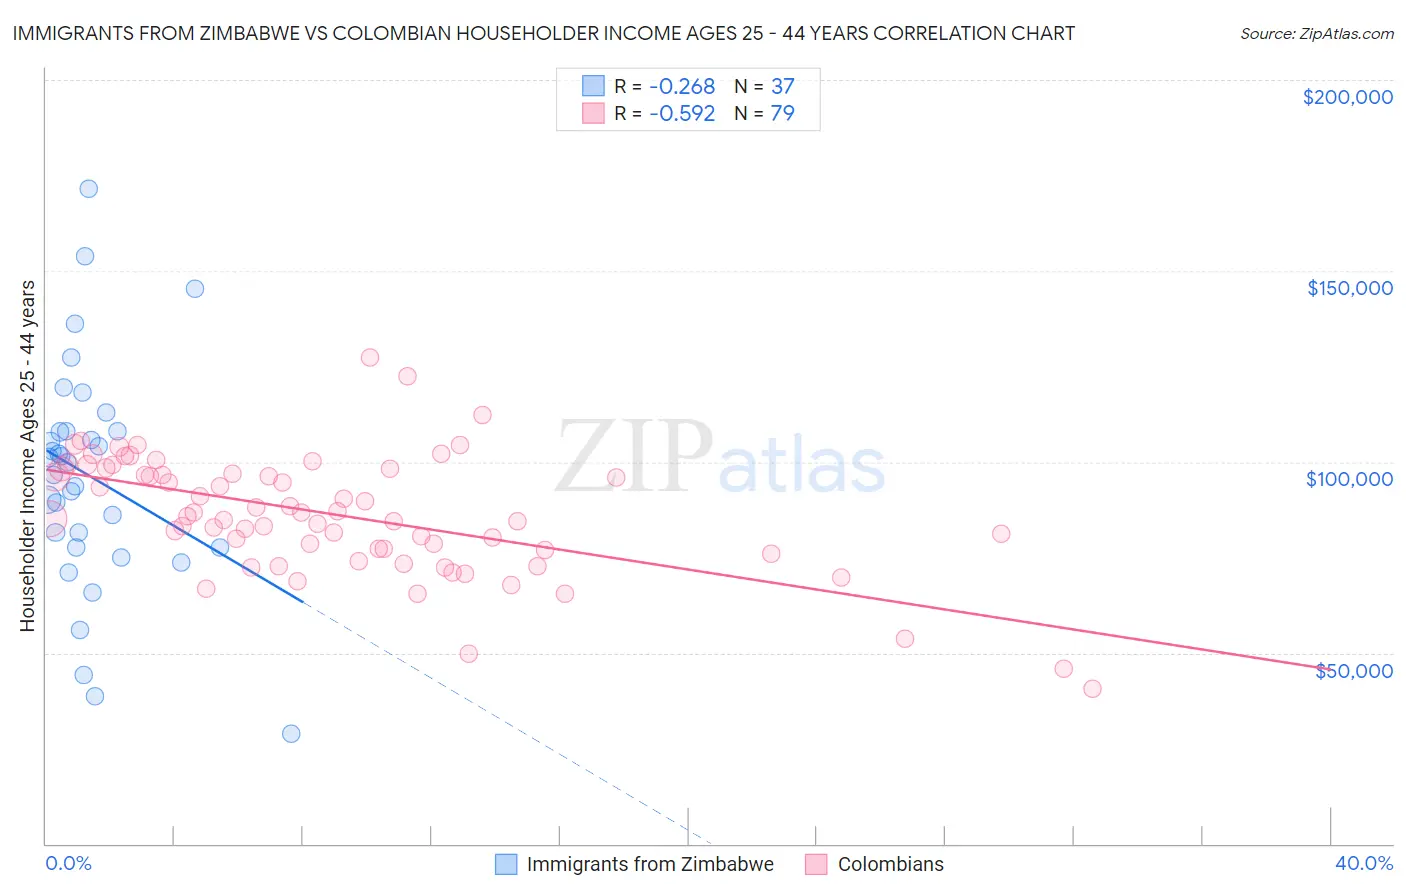 Immigrants from Zimbabwe vs Colombian Householder Income Ages 25 - 44 years